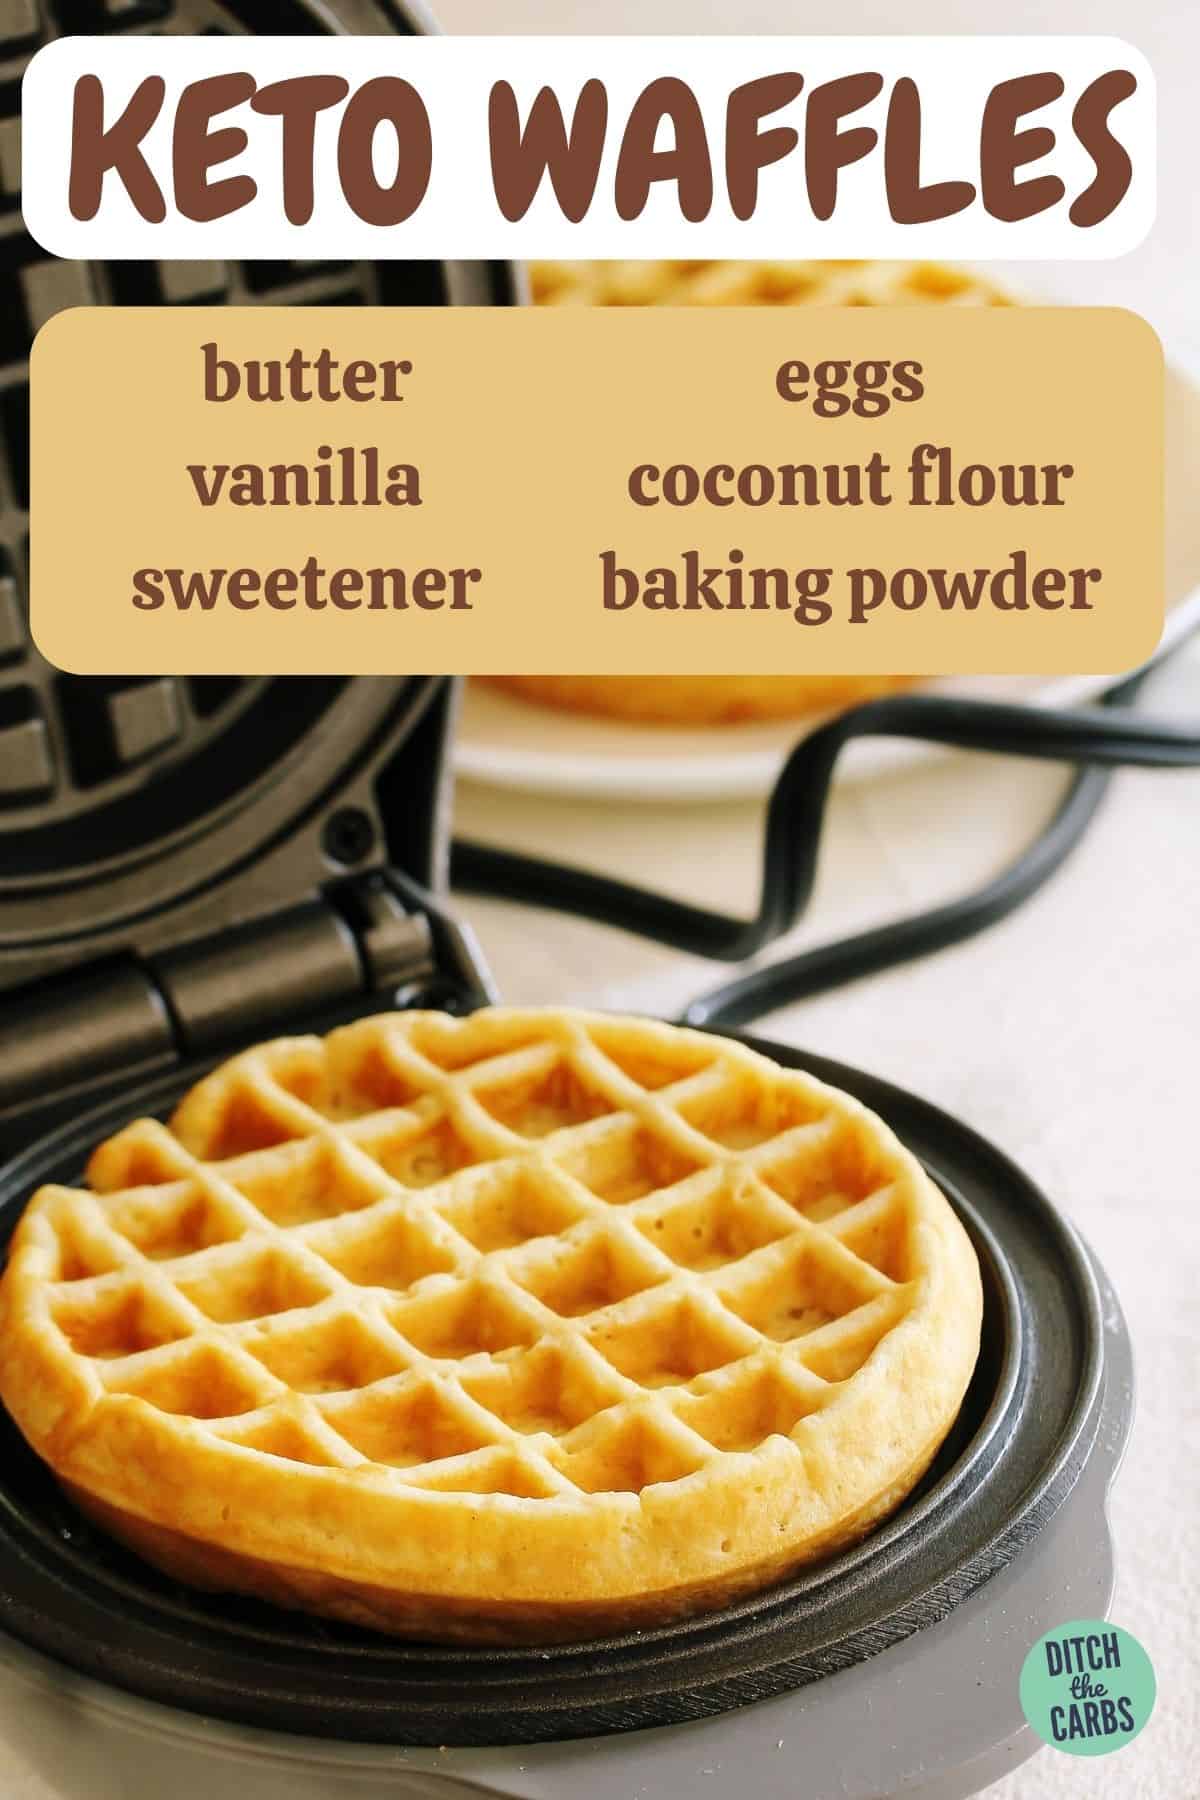 a waffle maker with 2 keto waffles cooking